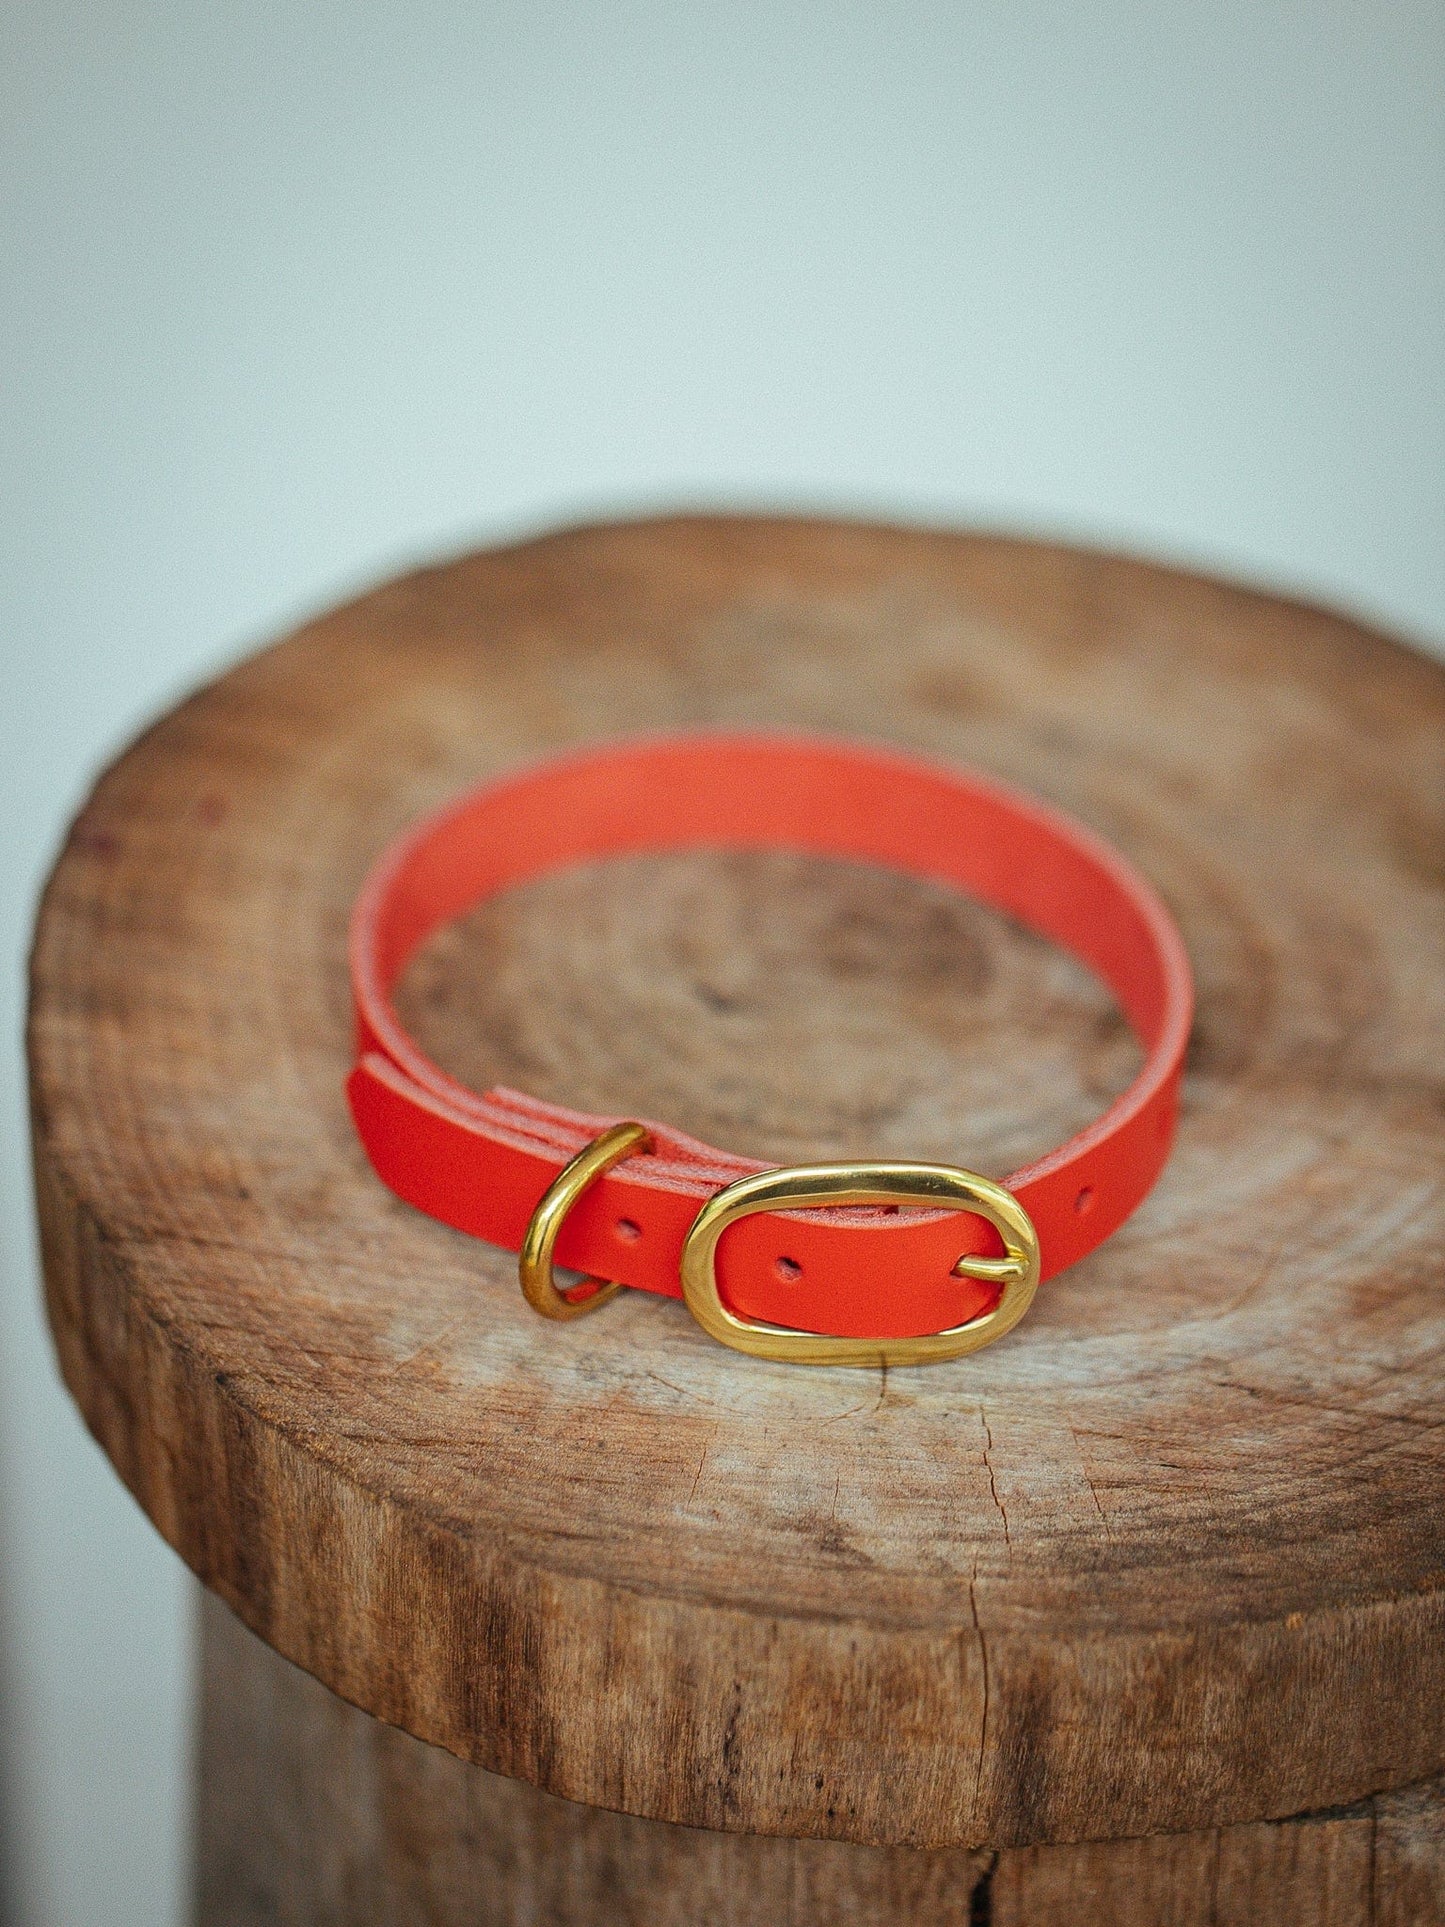 The Real McCaul Leathergoods Collar Classic Dog Collar - 15mm - Red Australian Made Australian Owned Leather Dog Collar with Brass Fittings- Australian Made